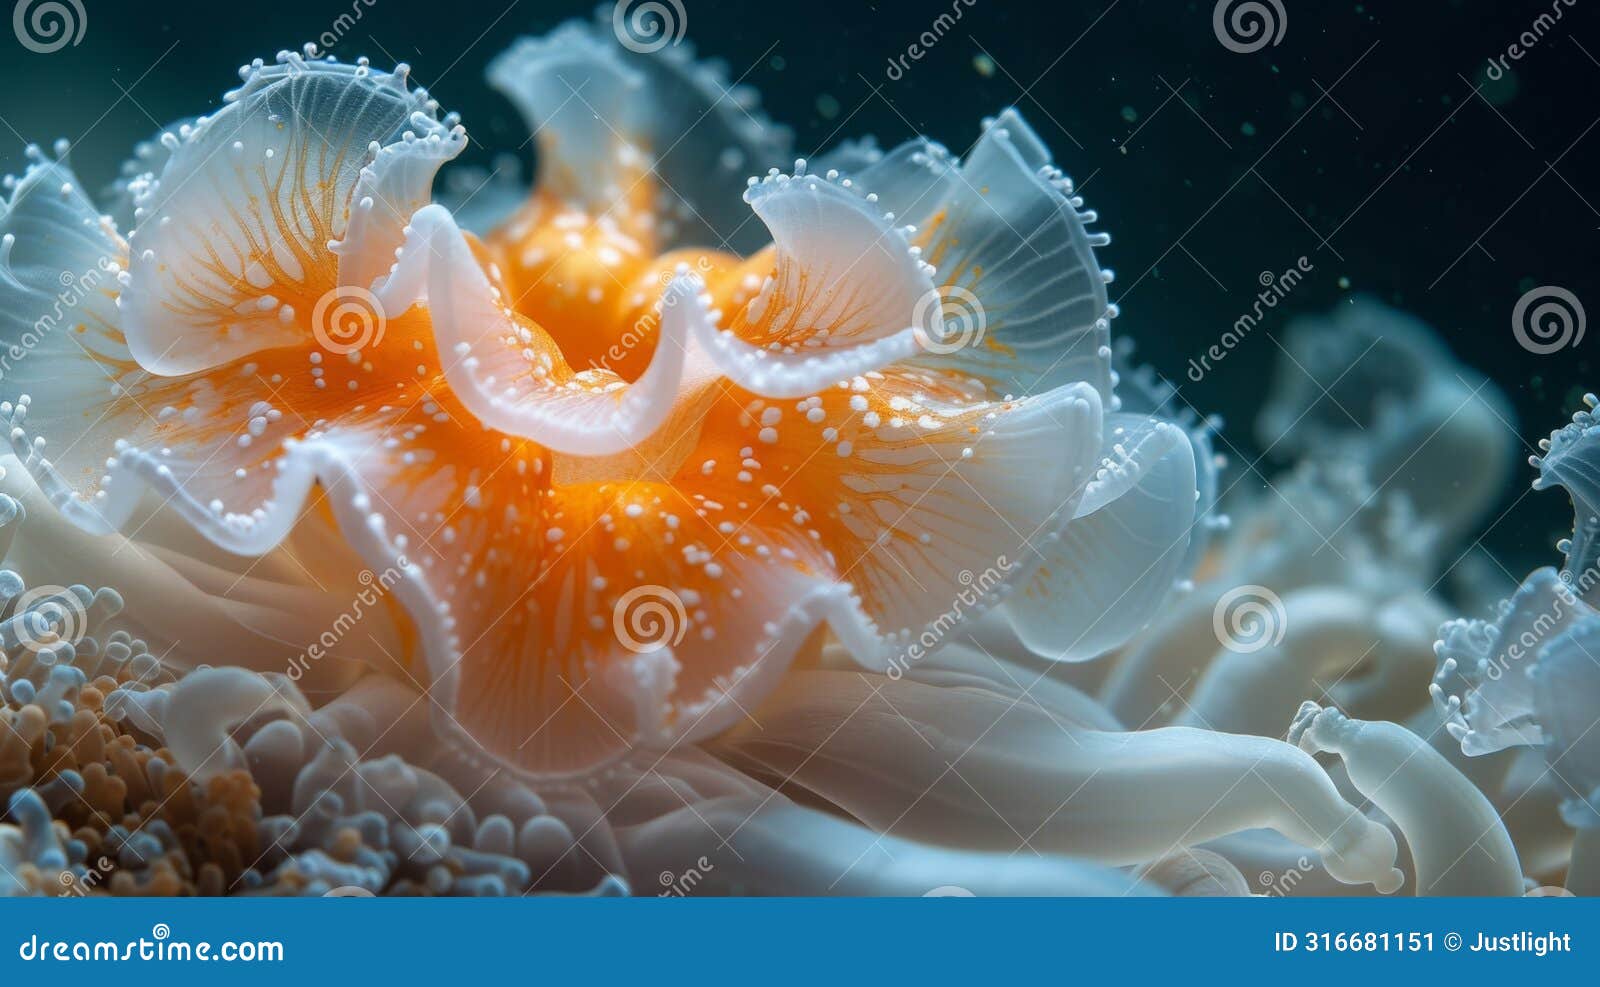 texture of a sea anemones soft frilly tentacles waving in the water like a beautiful dance